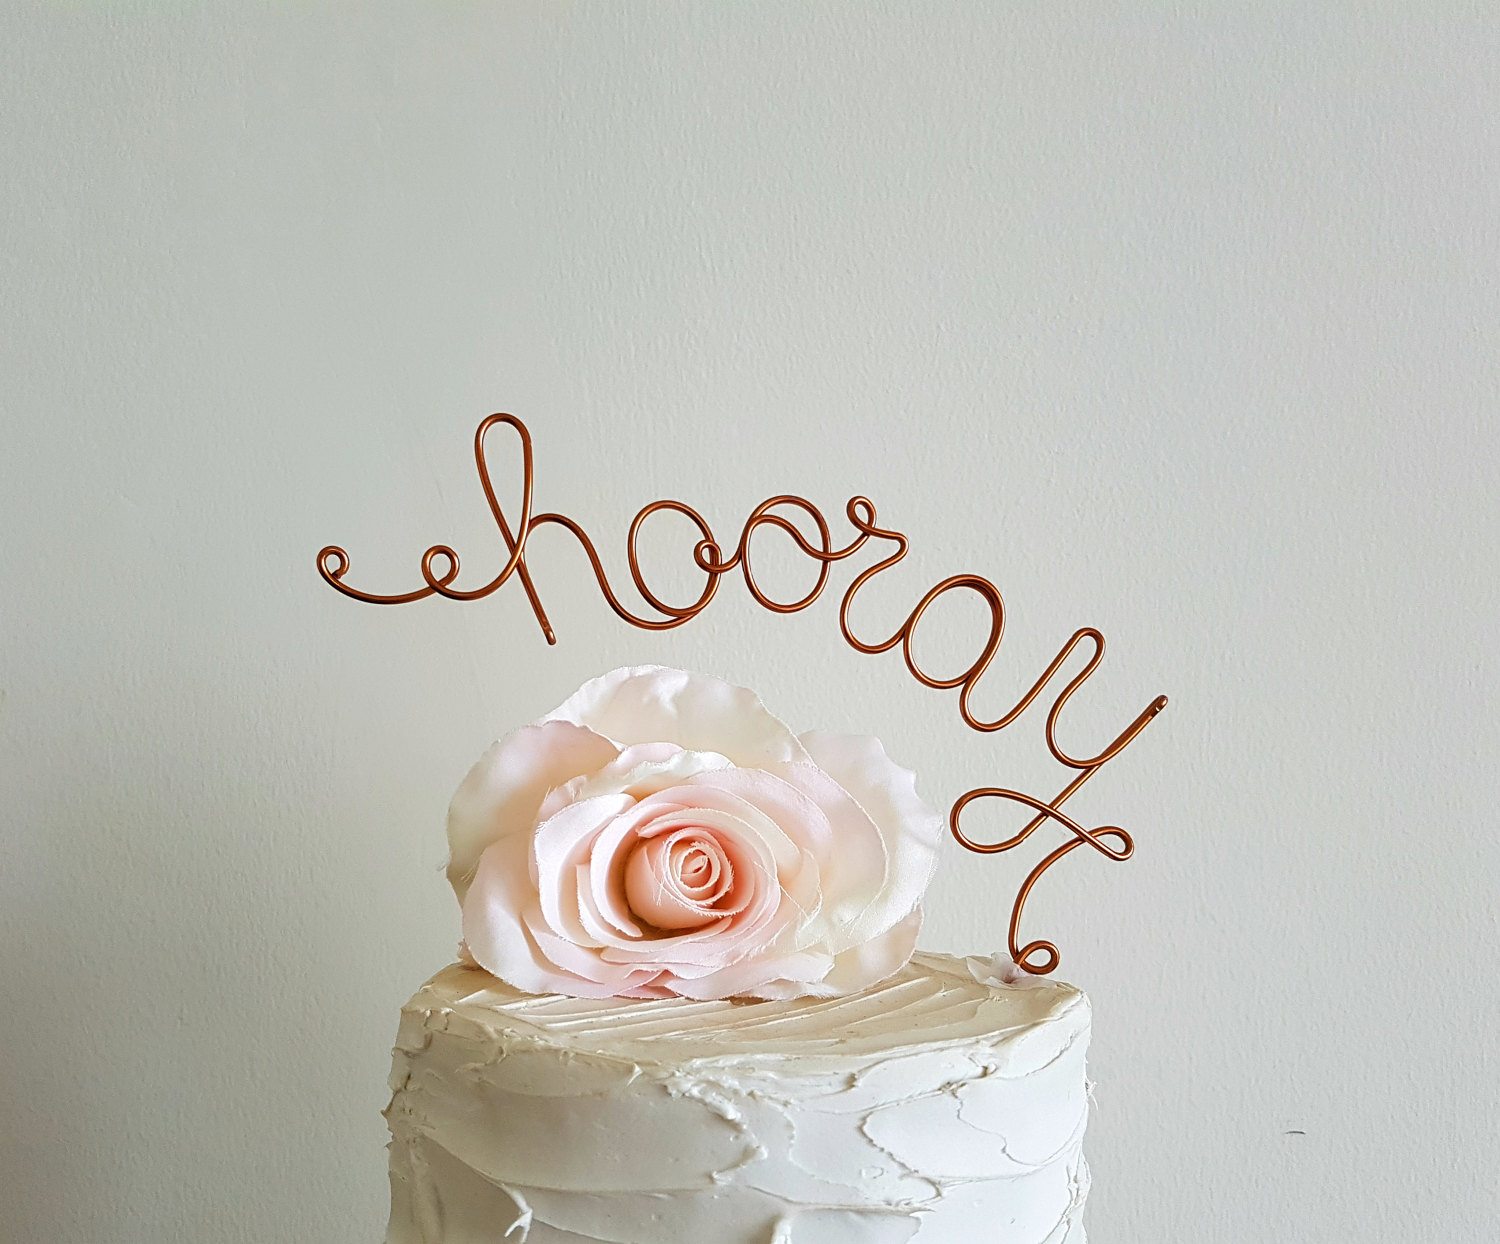 copper wire that says "hooray" cake topper and a flower